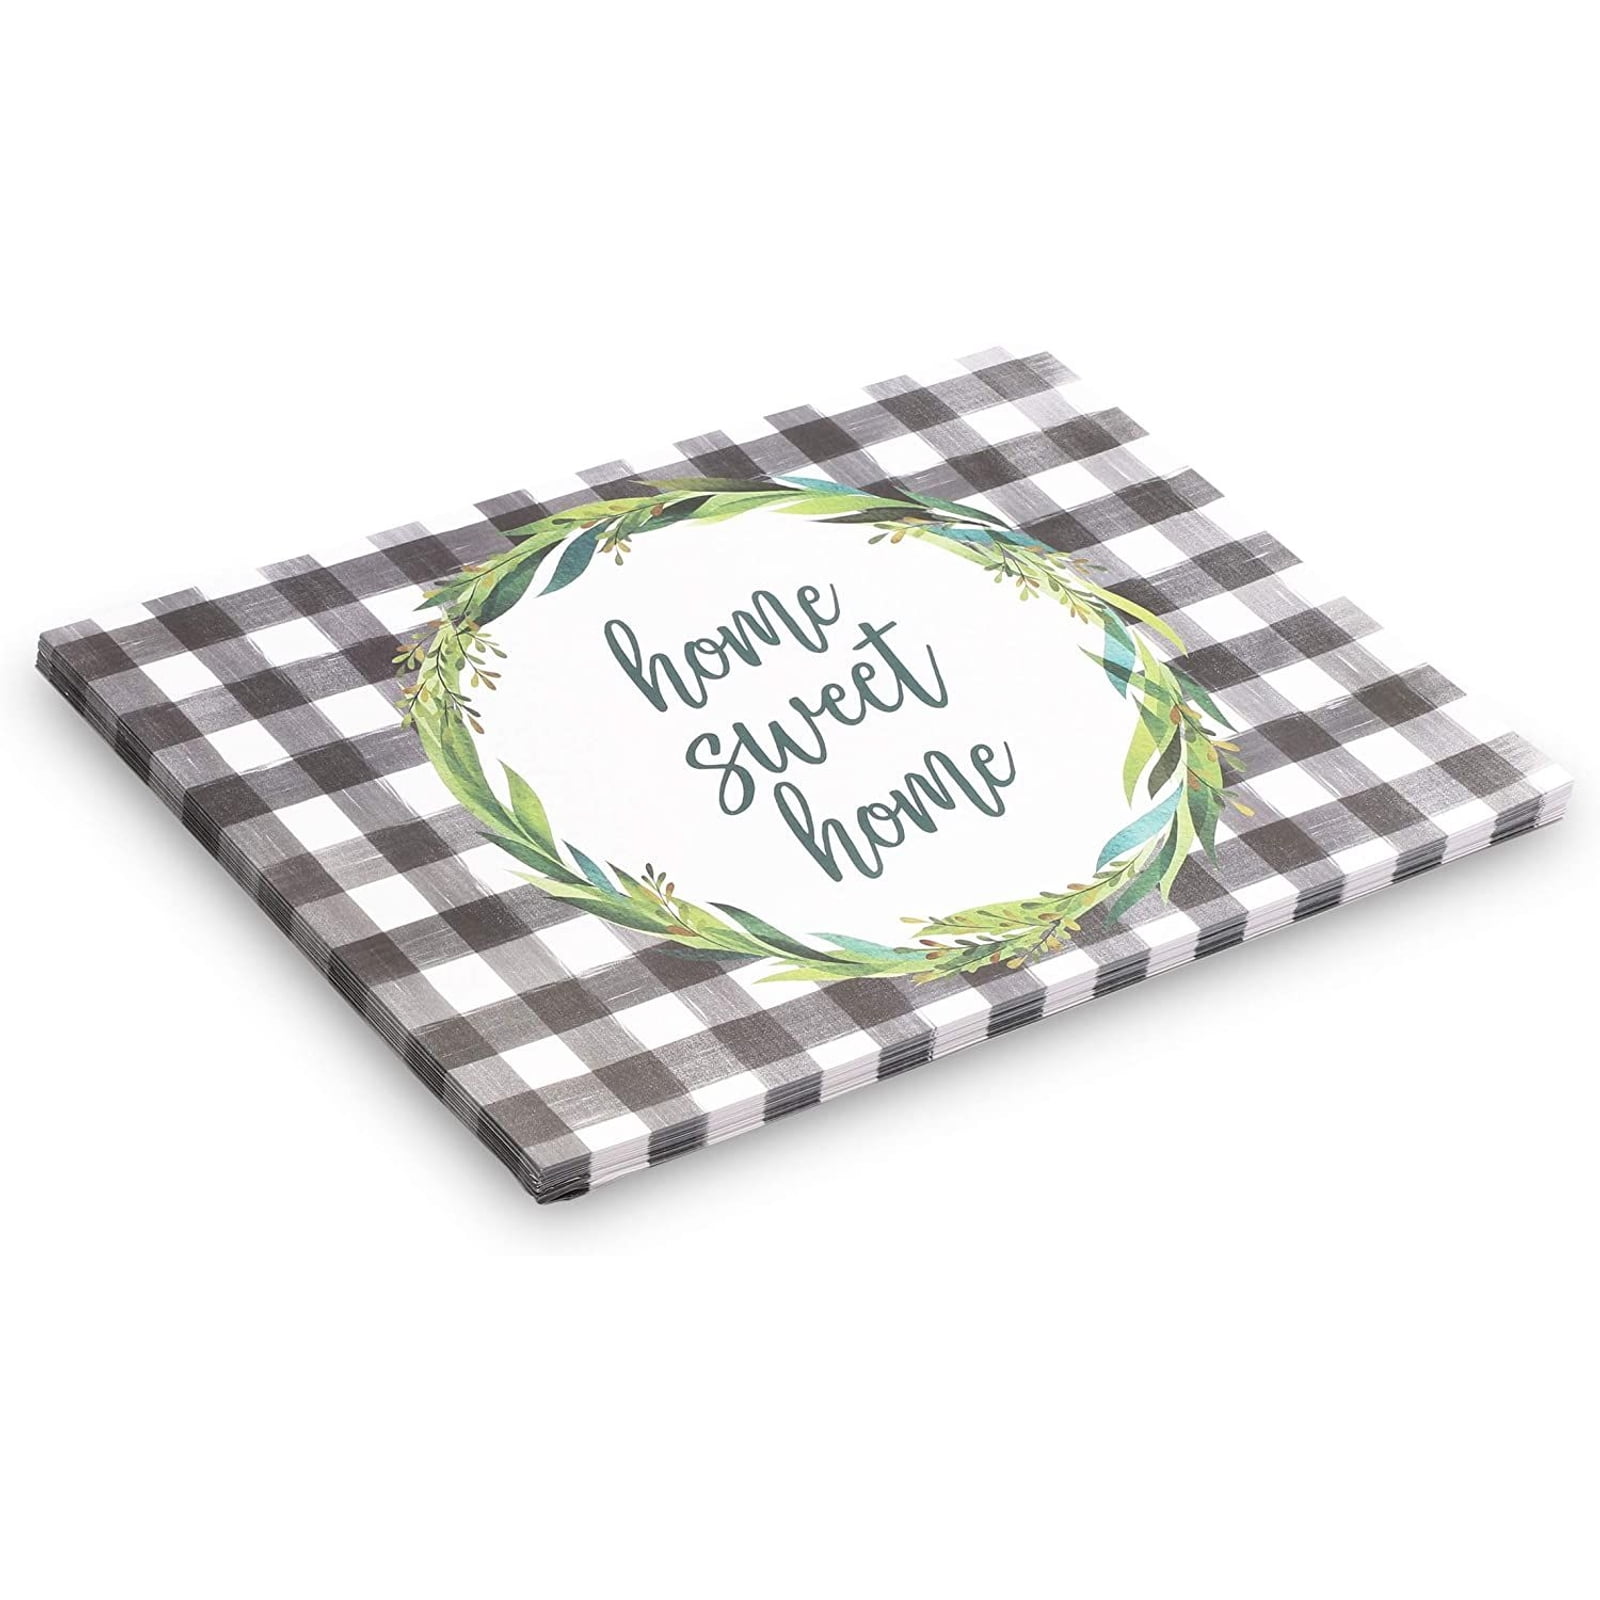 Country Rustic Decor Disposable More The Merrier Pak 24 Kitchen Table Placemats indigo Farmhouse Kitchen Decor Paper Placemats for Dining Table Mats